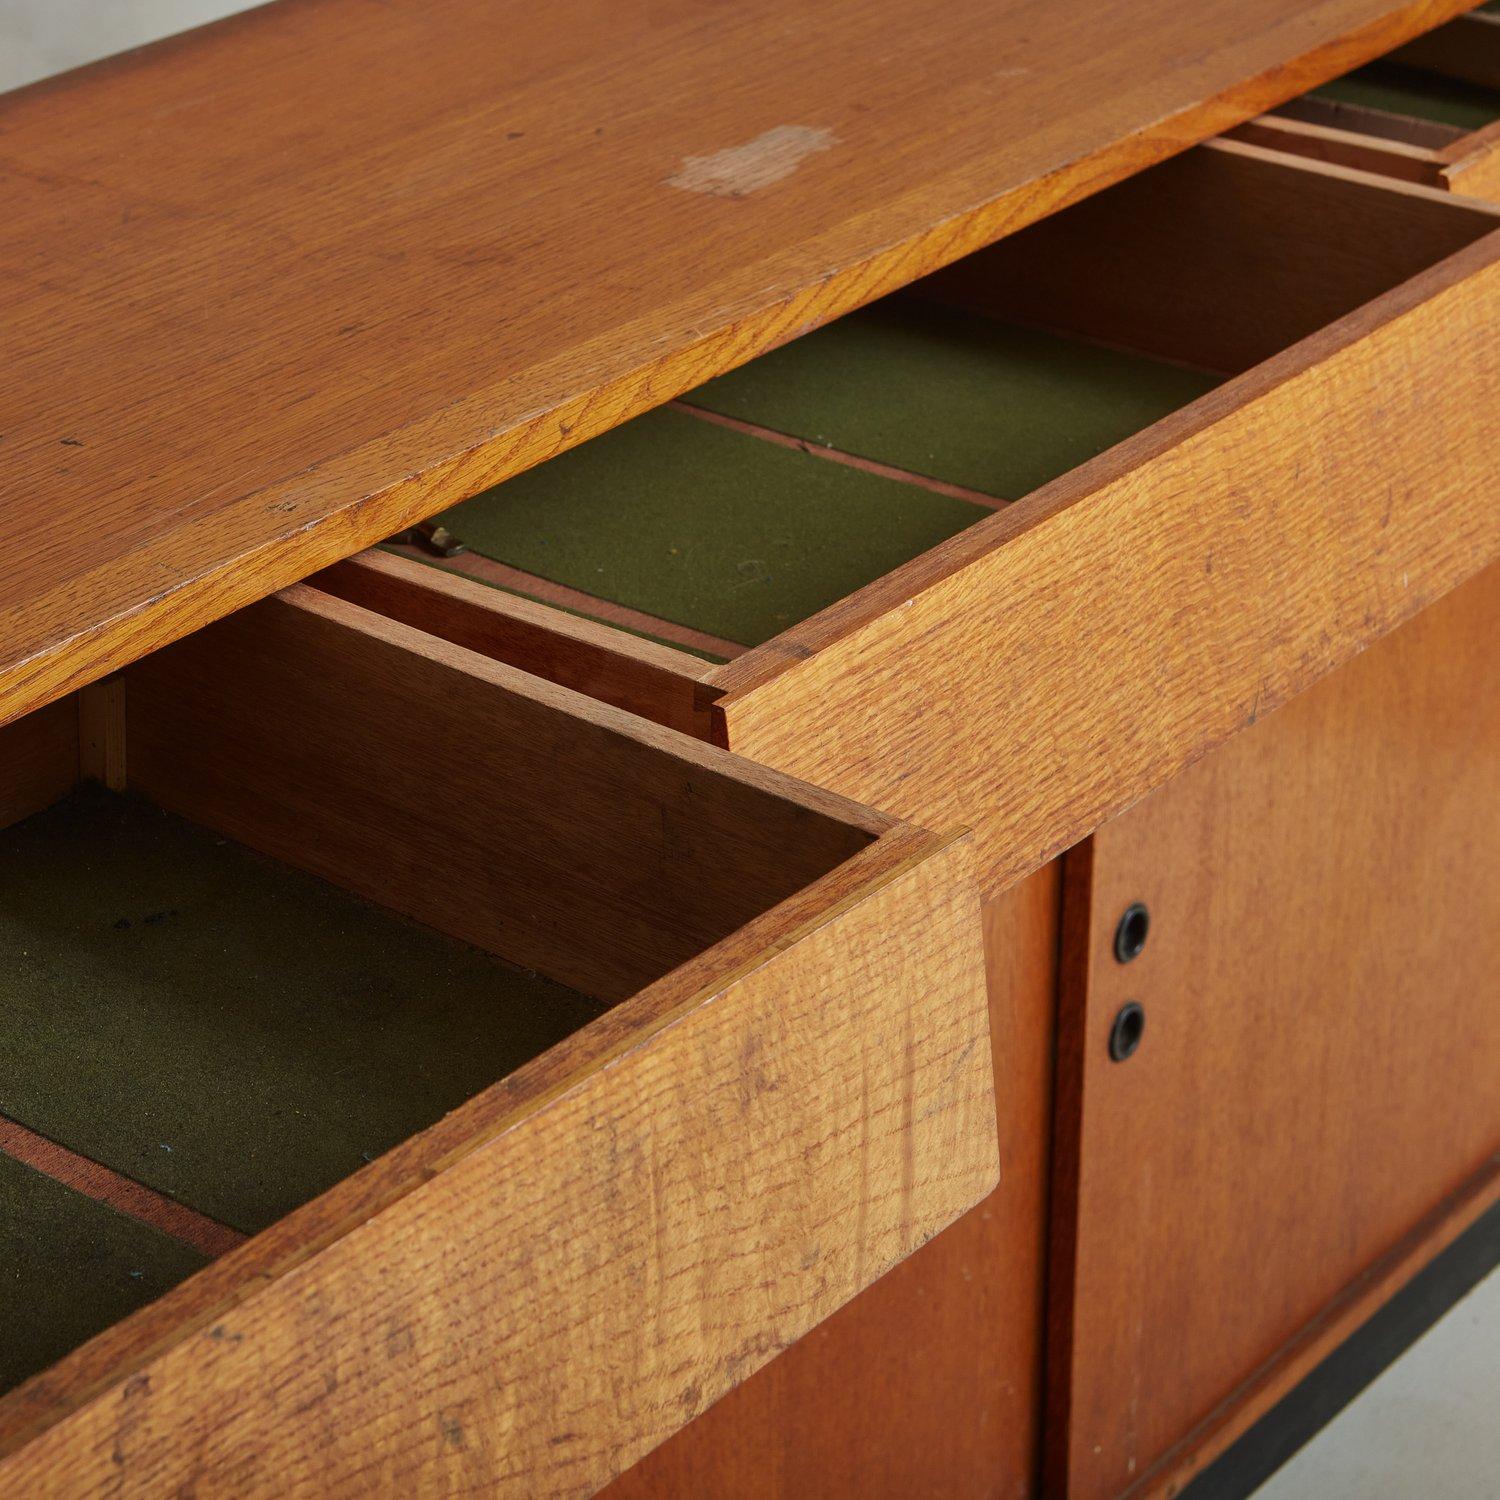 Monumental Oak Shop Cabinet with Drawers, France 1950s For Sale 1